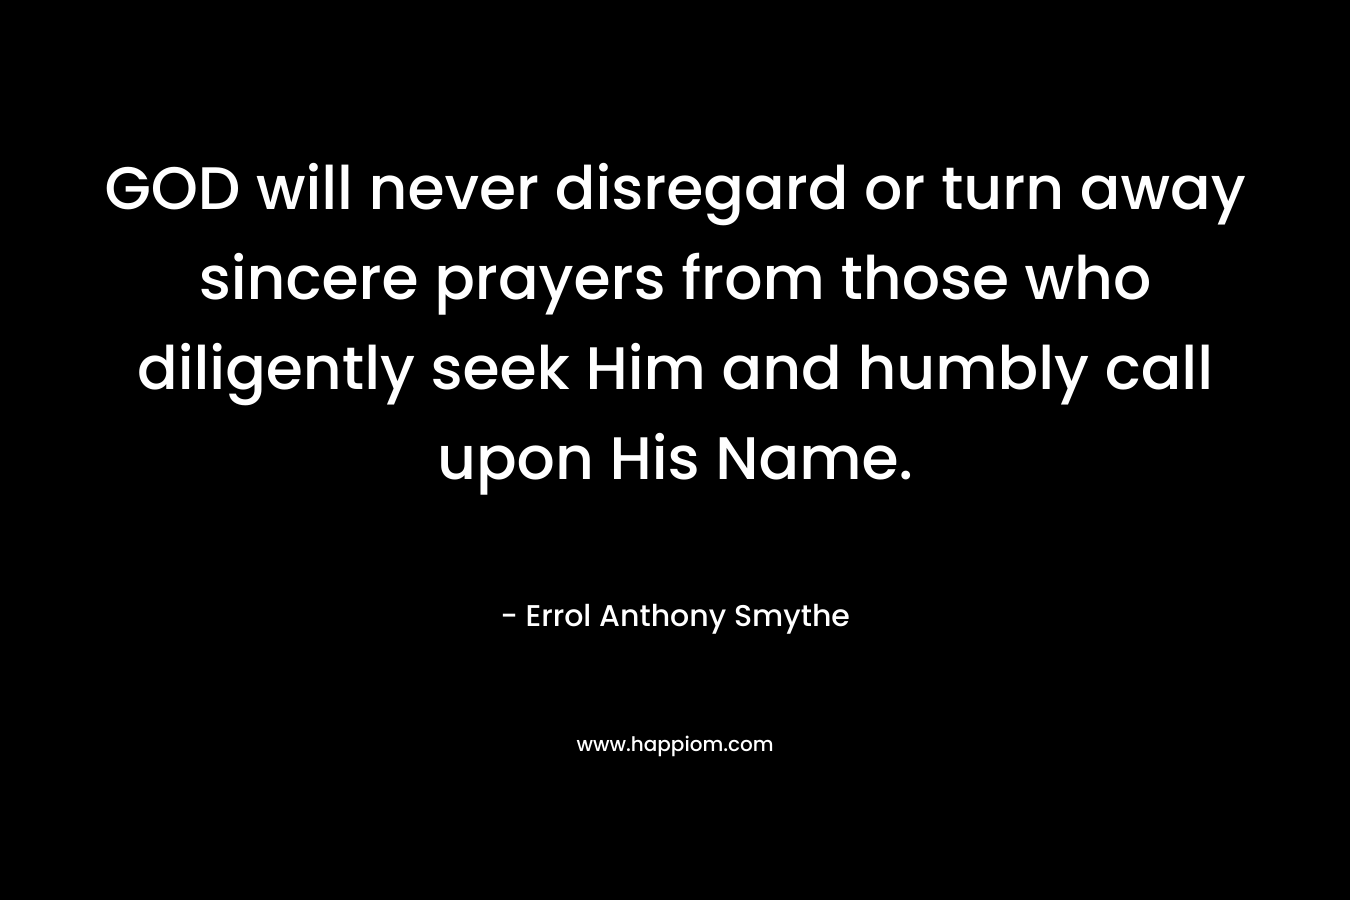 GOD will never disregard or turn away sincere prayers from those who diligently seek Him and humbly call upon His Name.